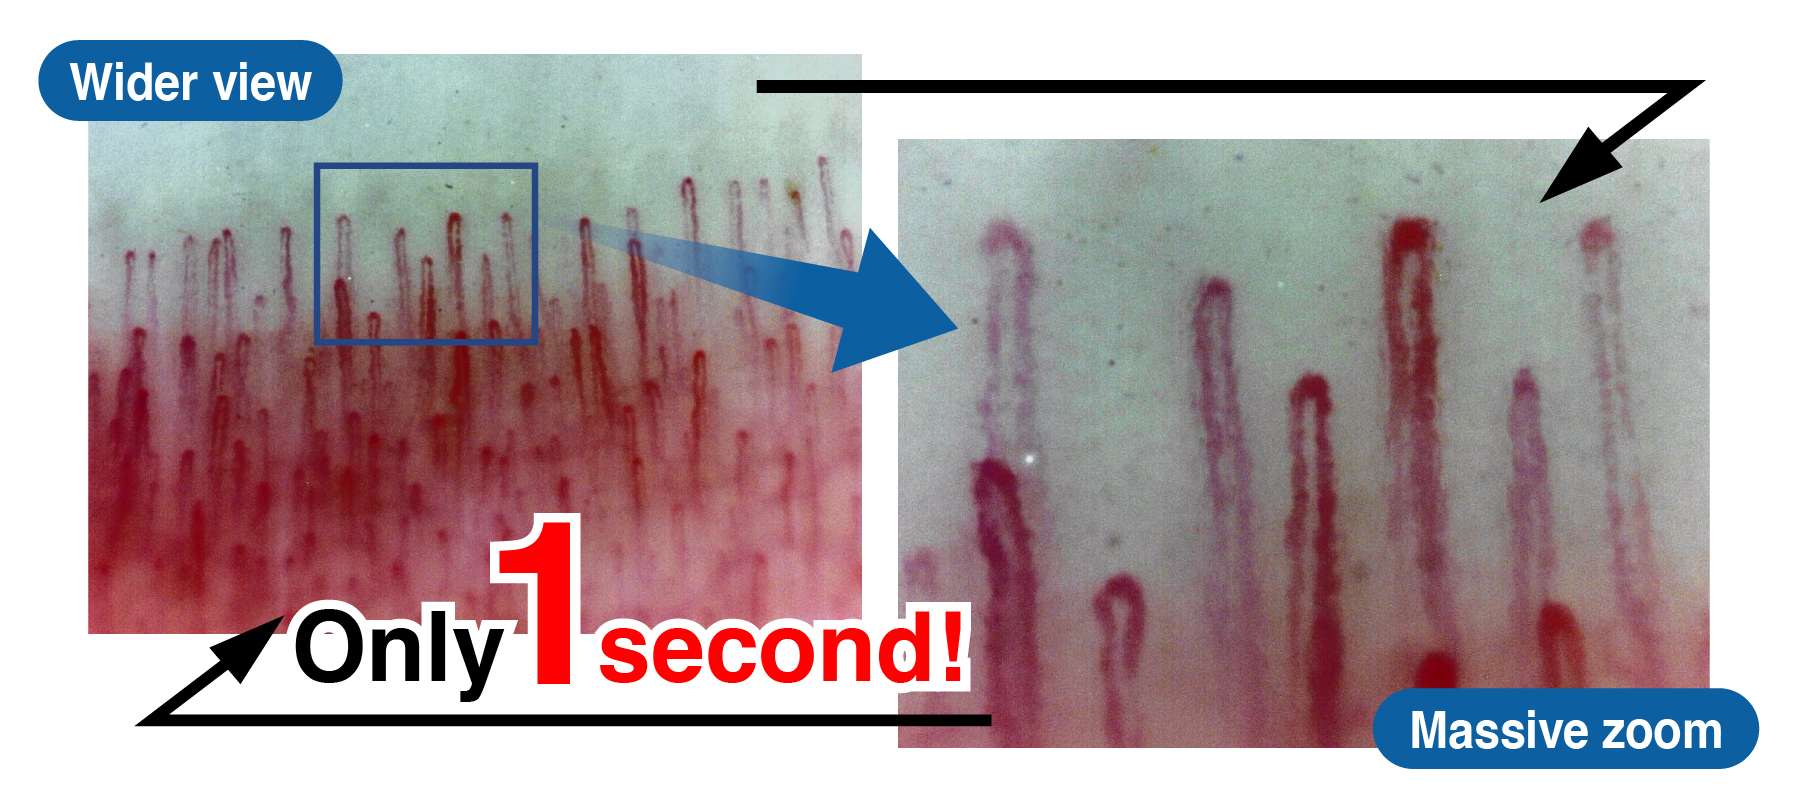 Capillary scope - you can switch between 'whole image' and 'super magnification' in only one second.